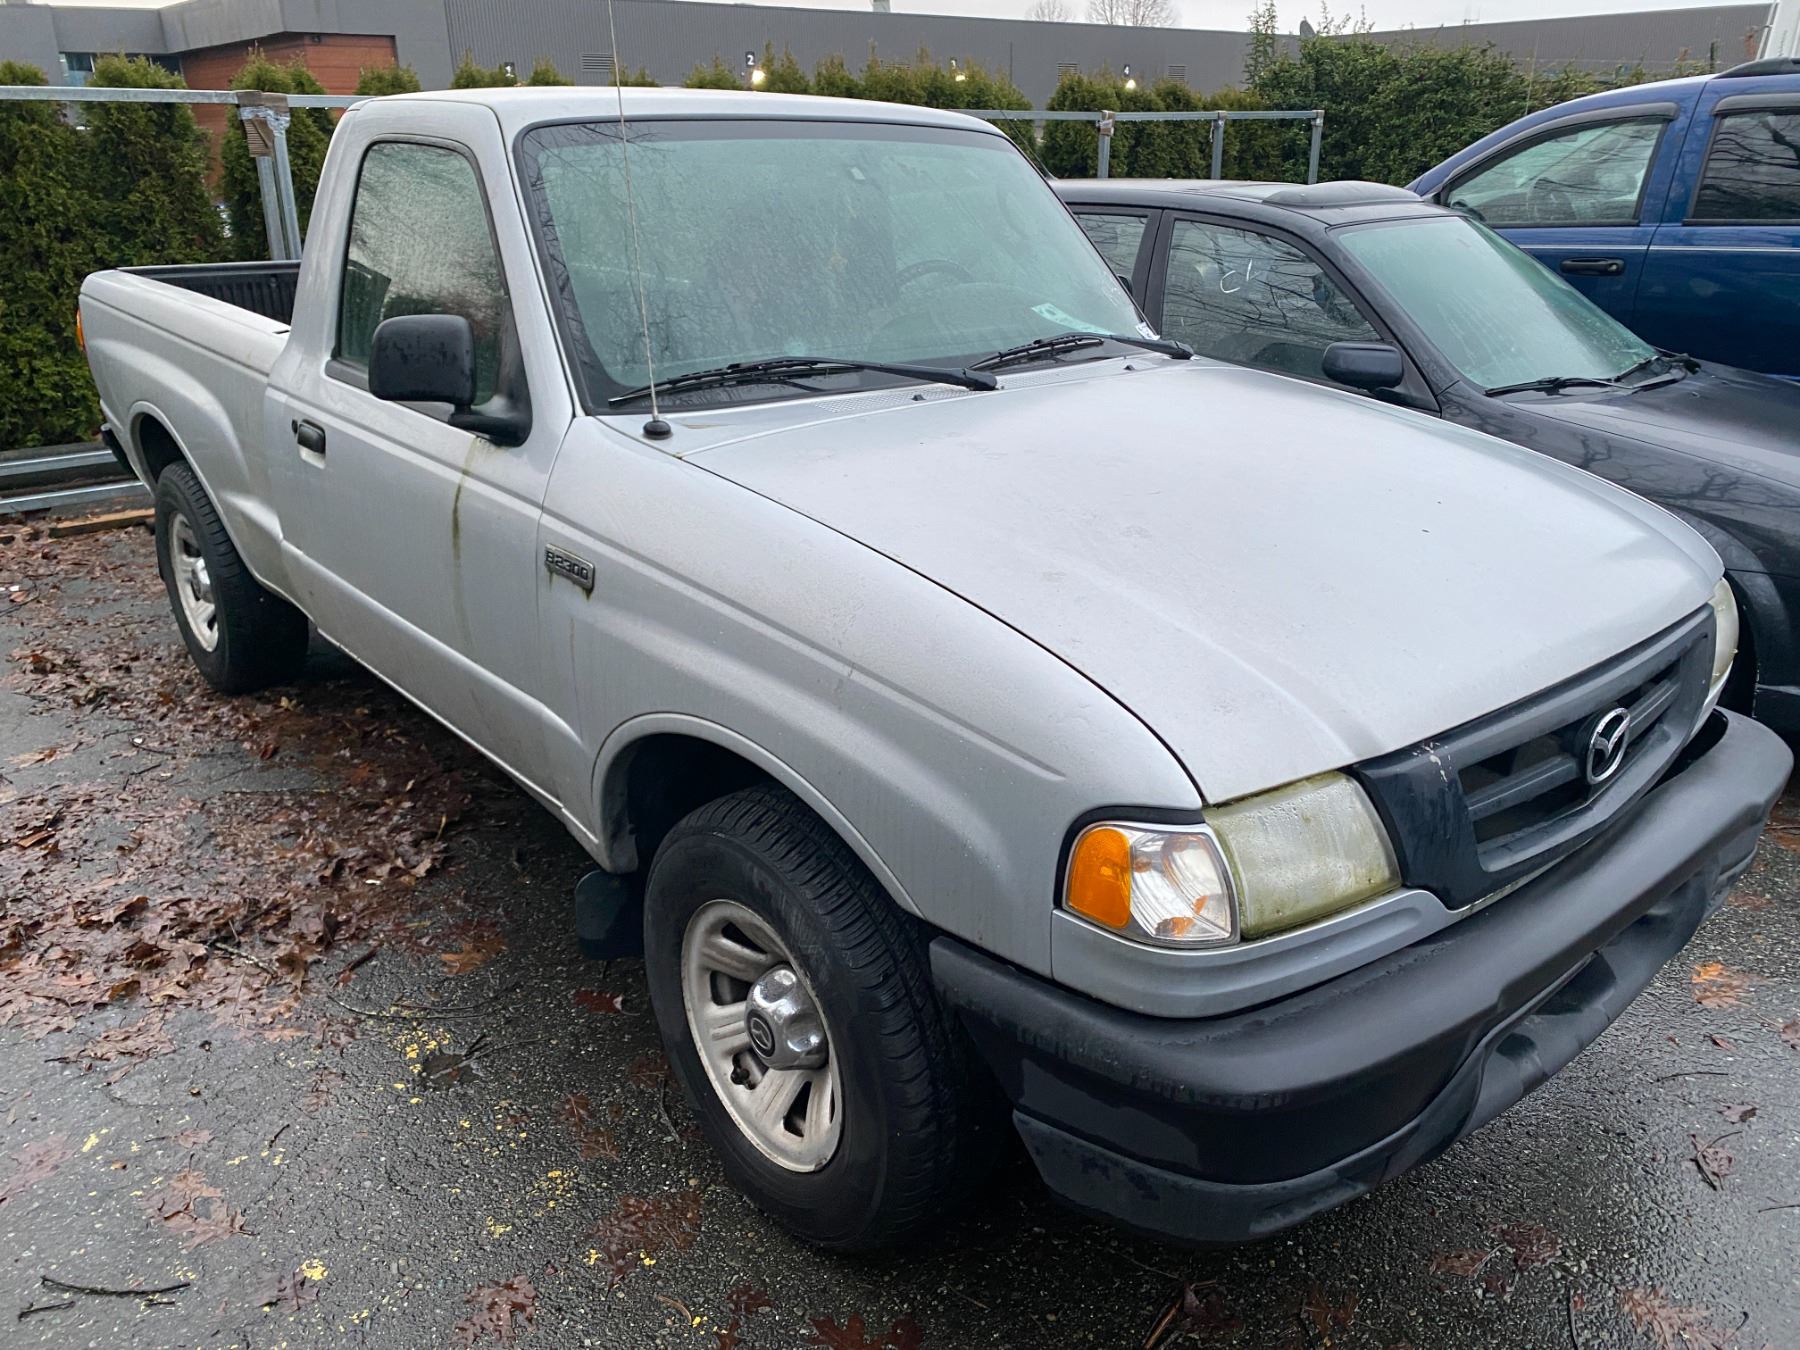 2003 MAZDA B2300, 2DR PU, GREY, VIN # 4F4YR12D03RM10290 - Able Auctions